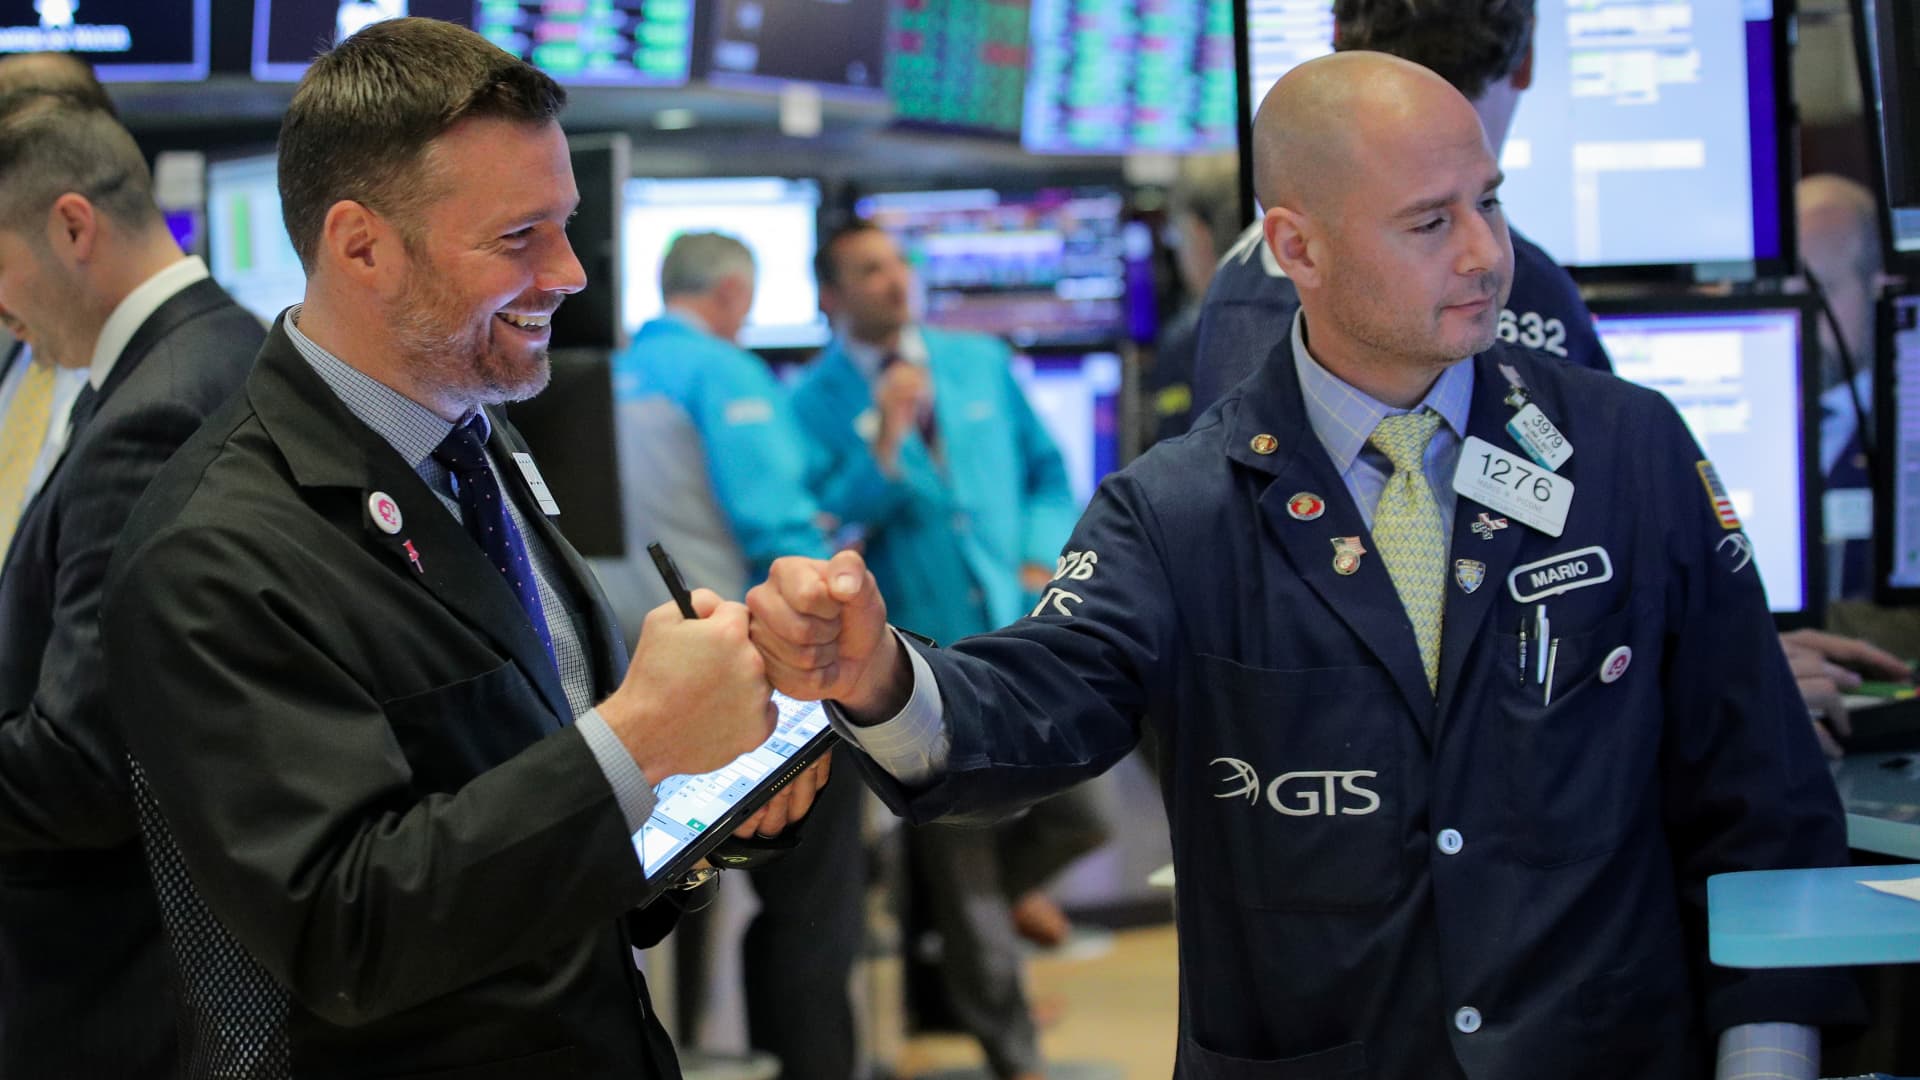 Wall Street rally gains steam, Dow surges 600 points after strong jobs report: Live updates